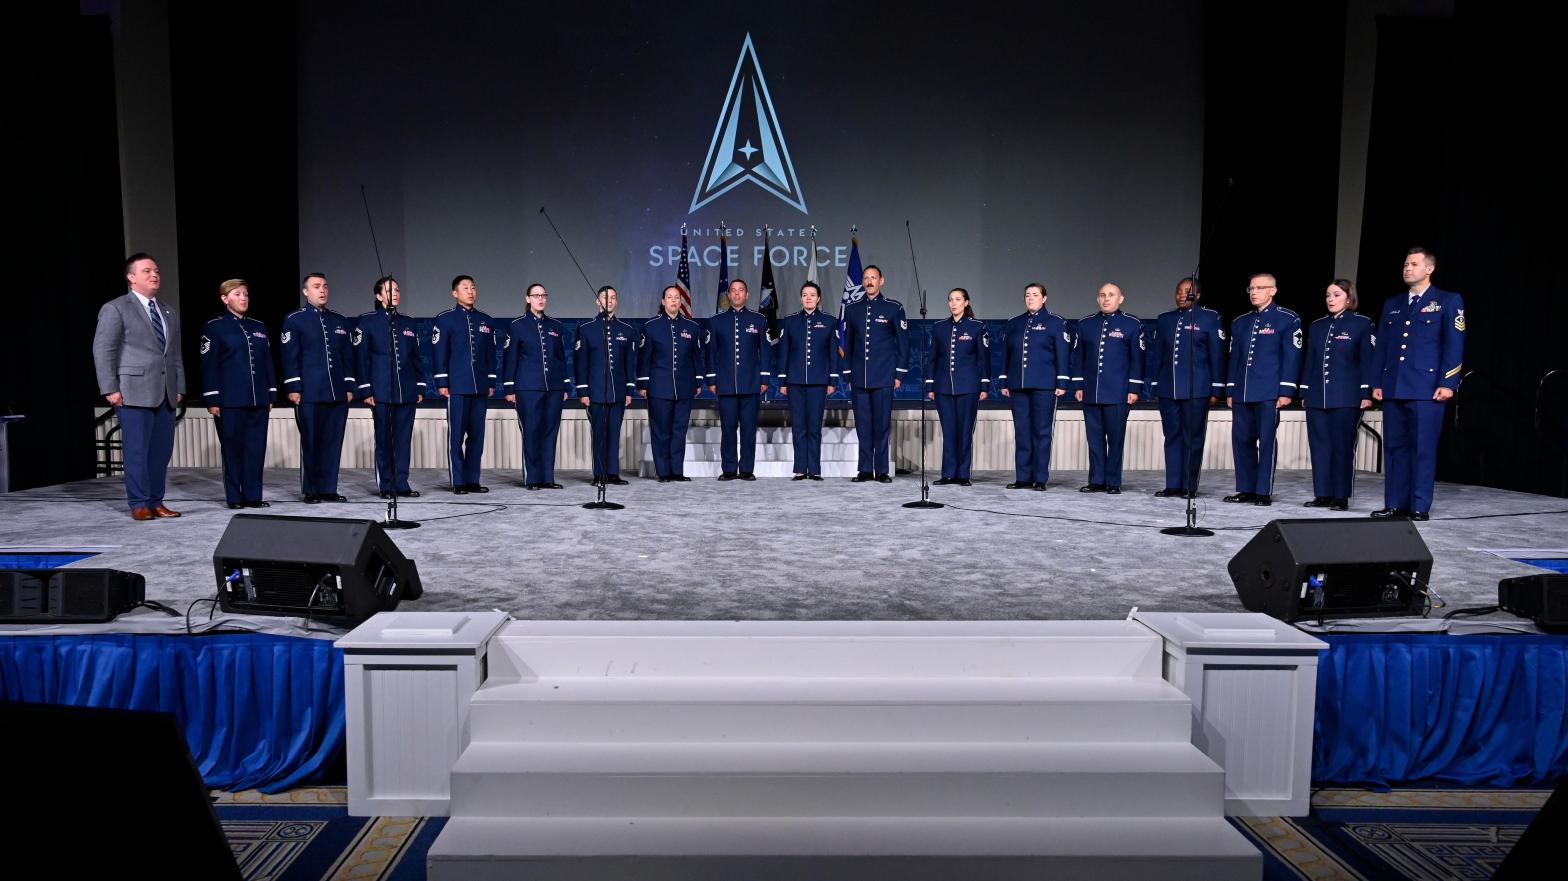 Air Force Band members singing the new U.S. Space Force theme song during the 2022 Air, Space and Cyber Conference in National Harbour. (Photo: U.S. Space Force)